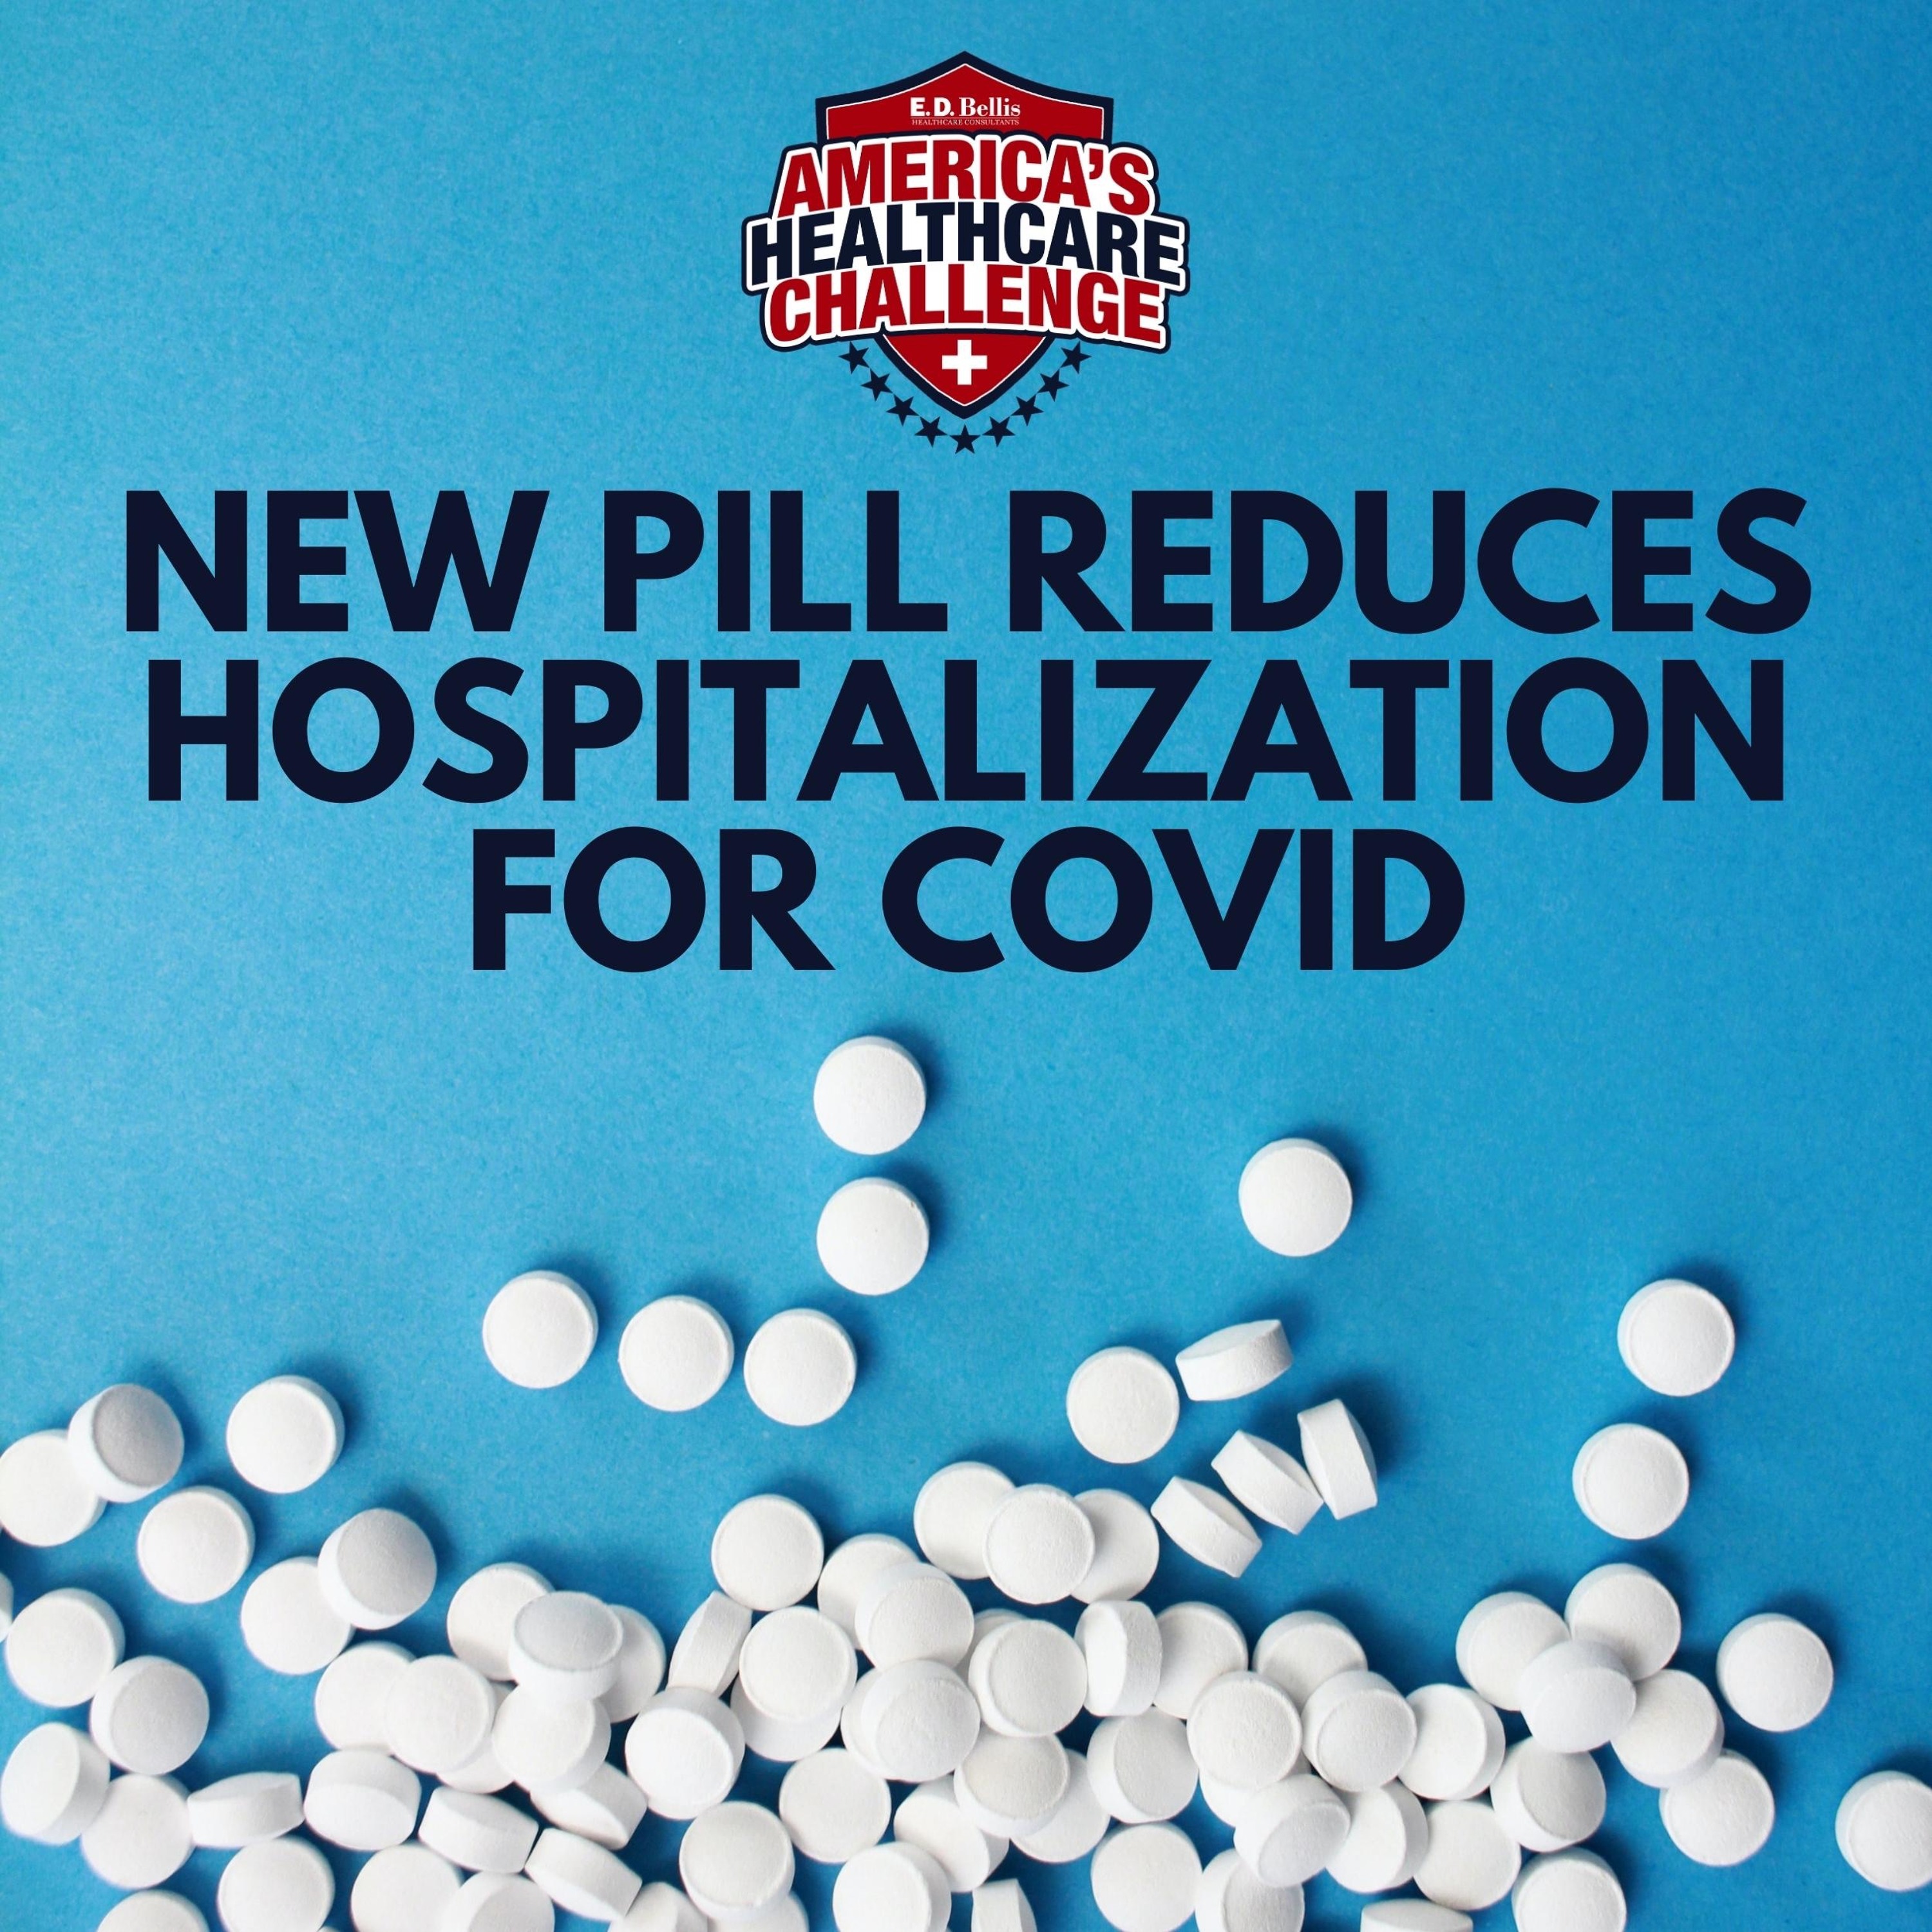 New Pill Reduces Hospitalizations for COVID and Other Top Stories this Week